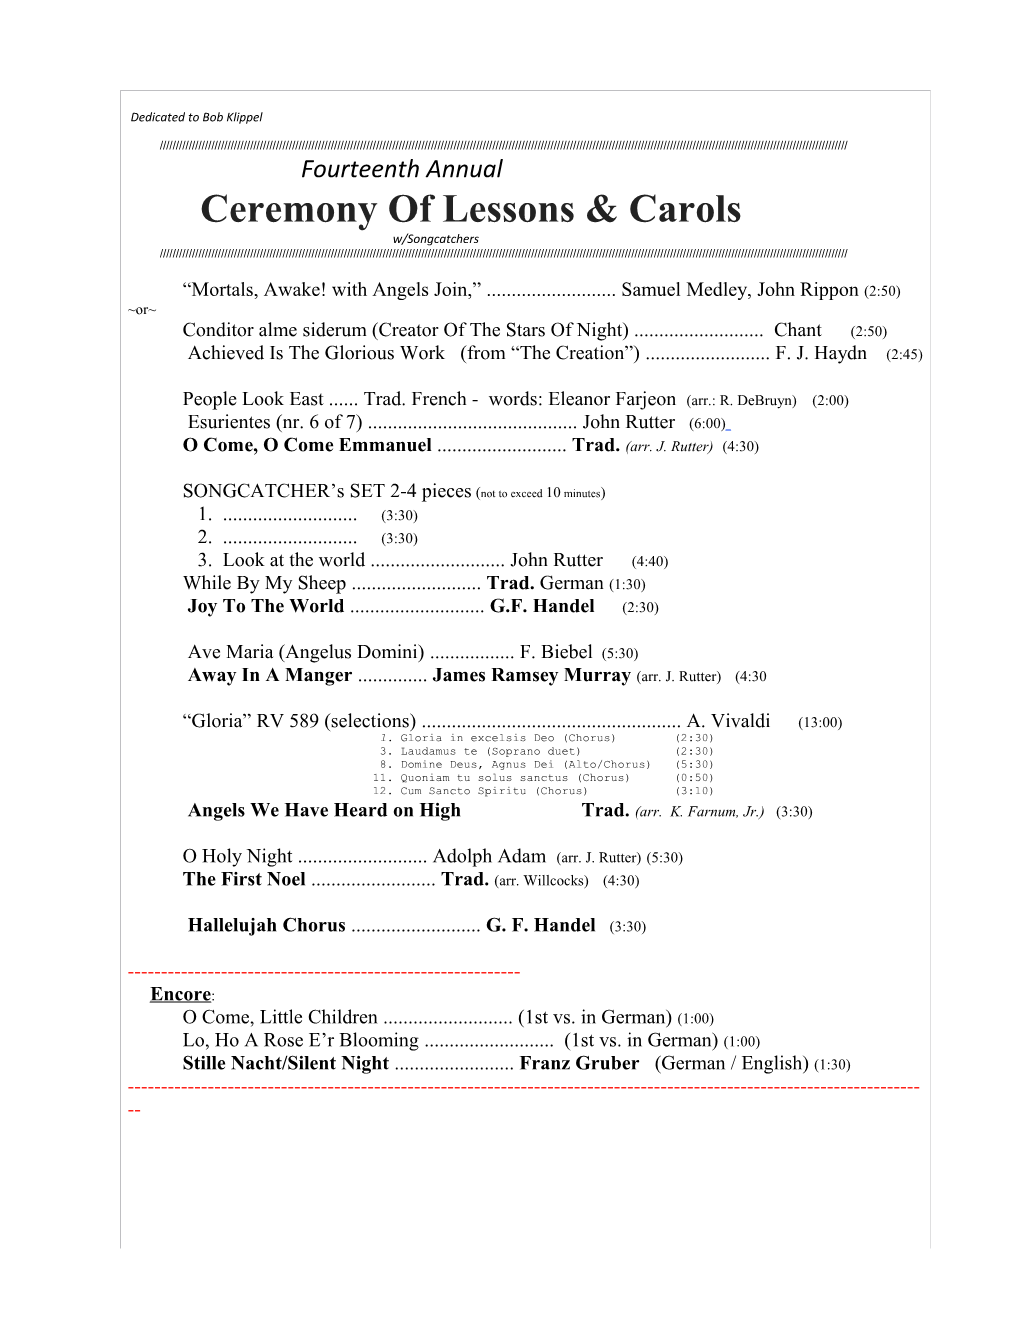 Fourteenth Annual Ceremony of Lessons & Carols